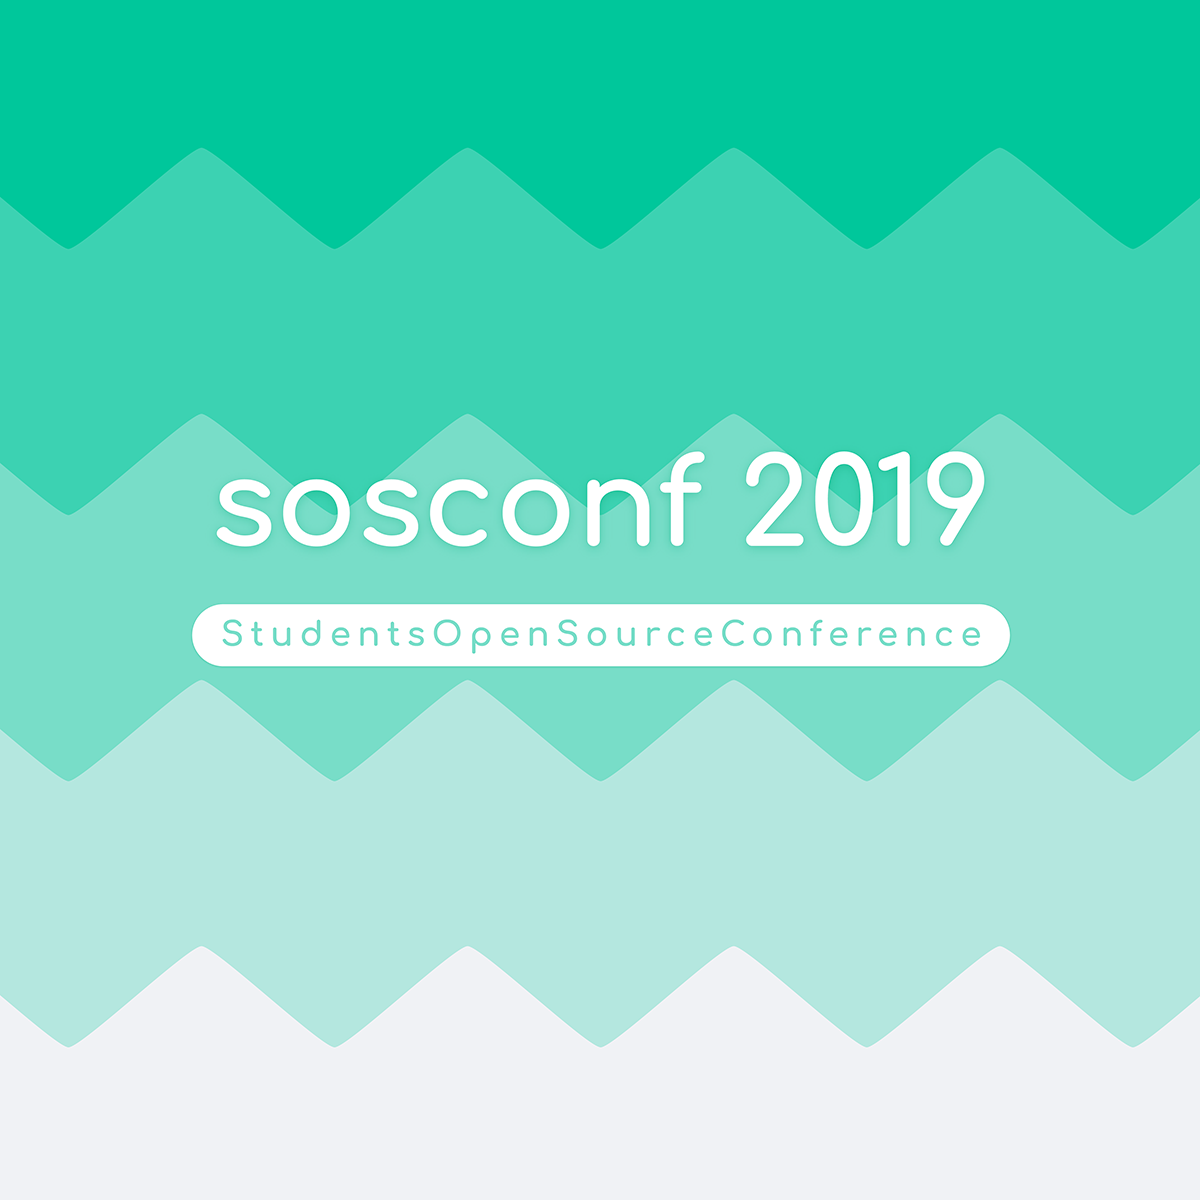 sosconf 2019 – 1st Students Open Source Conference